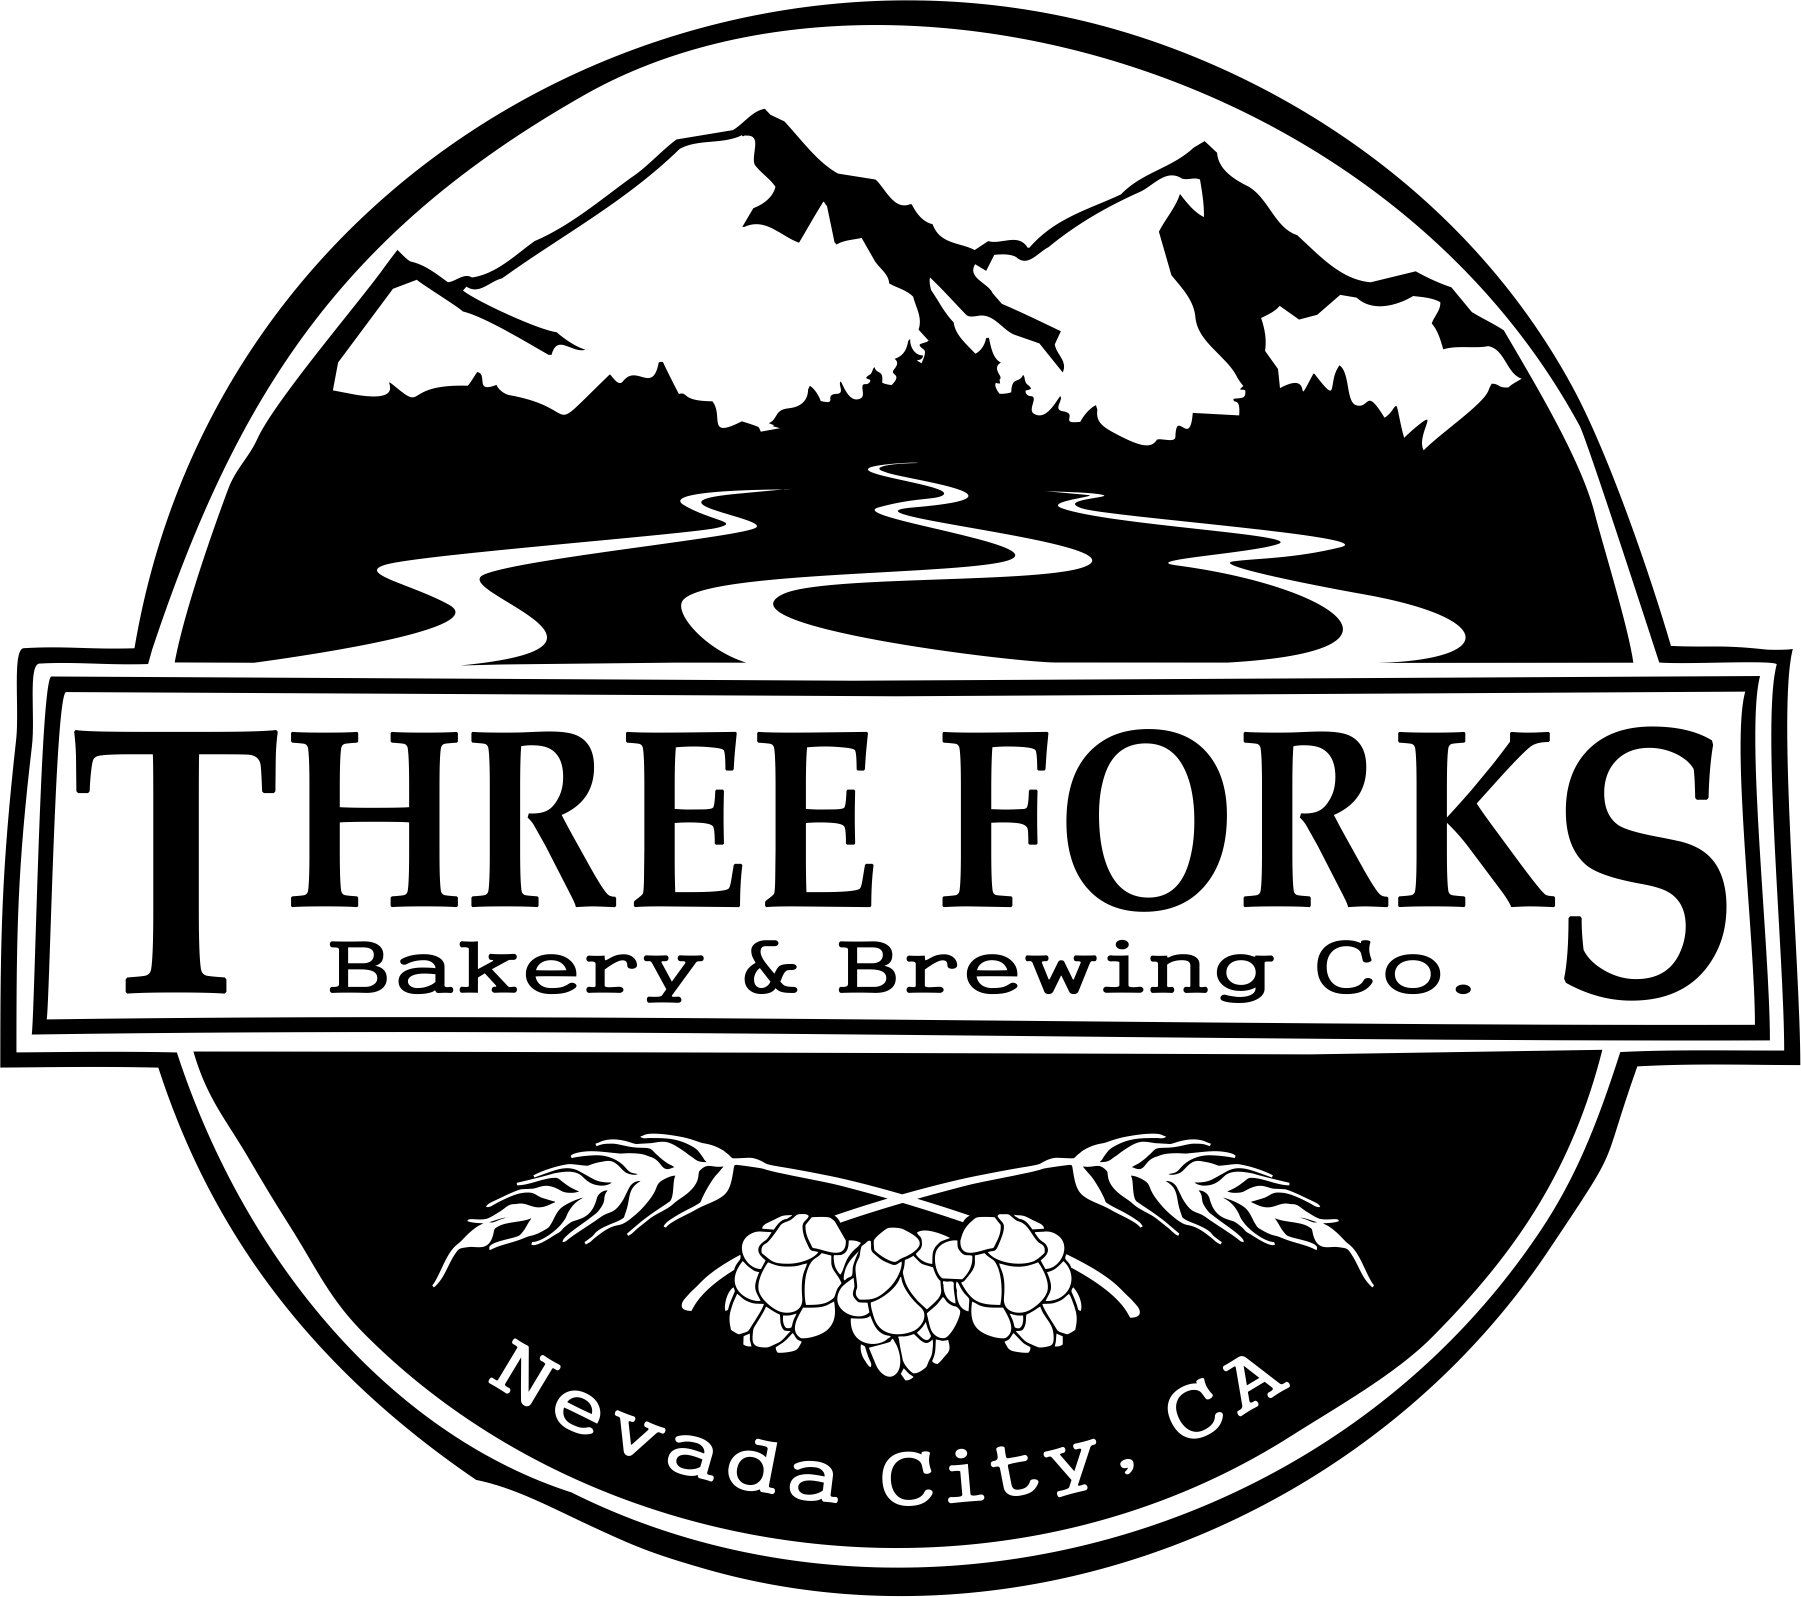 Three Forks Bakery & Brewery